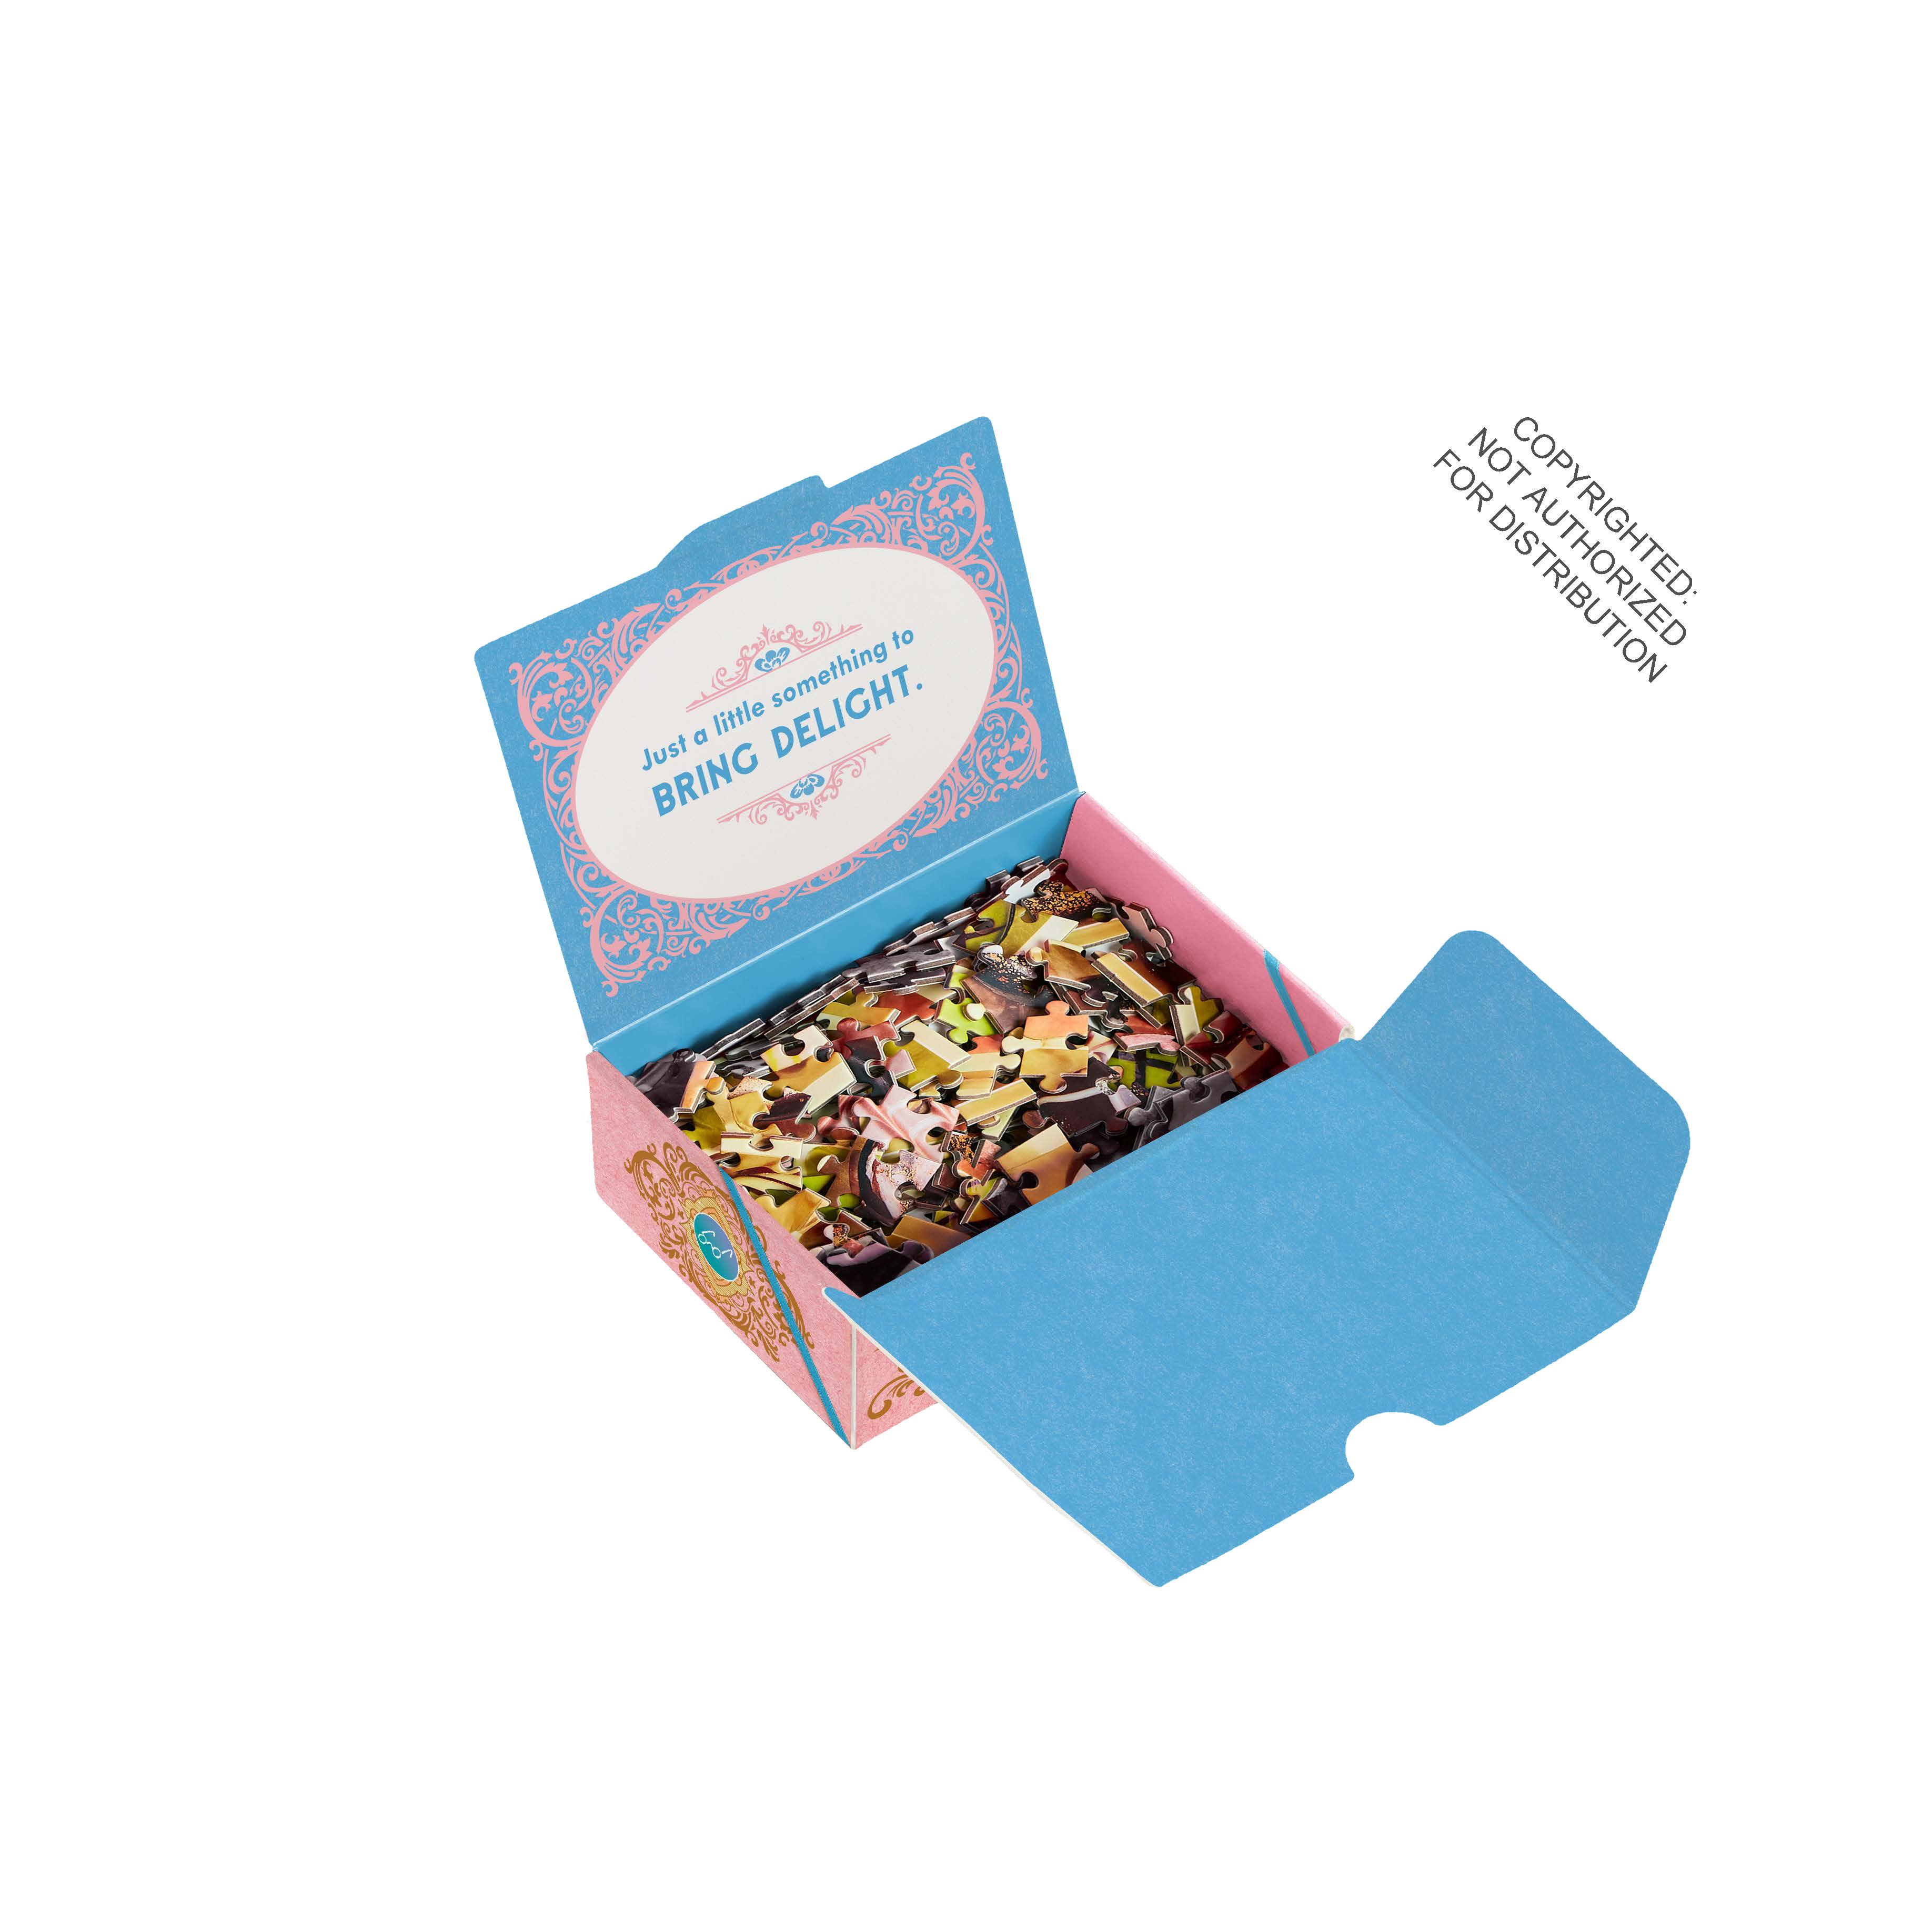 A Little Something Donuts 150-Piece Mini Puzzle